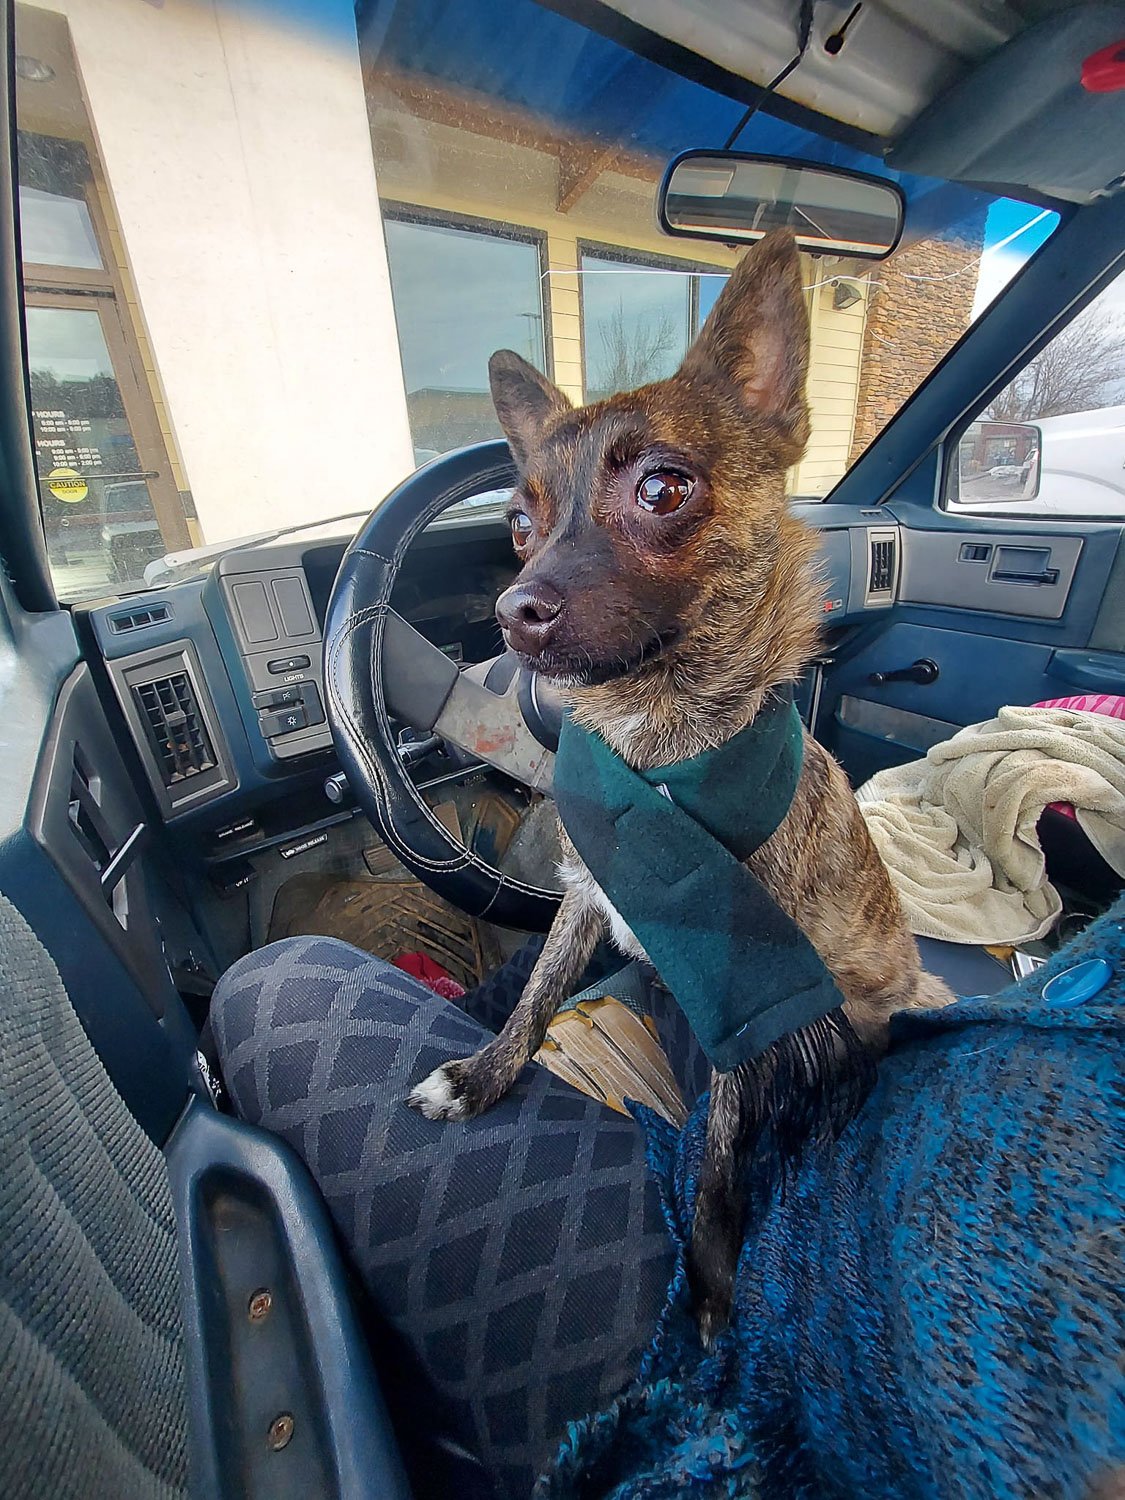 A Chihuahua dog wearing a brown scarf sitting in front seat of a car